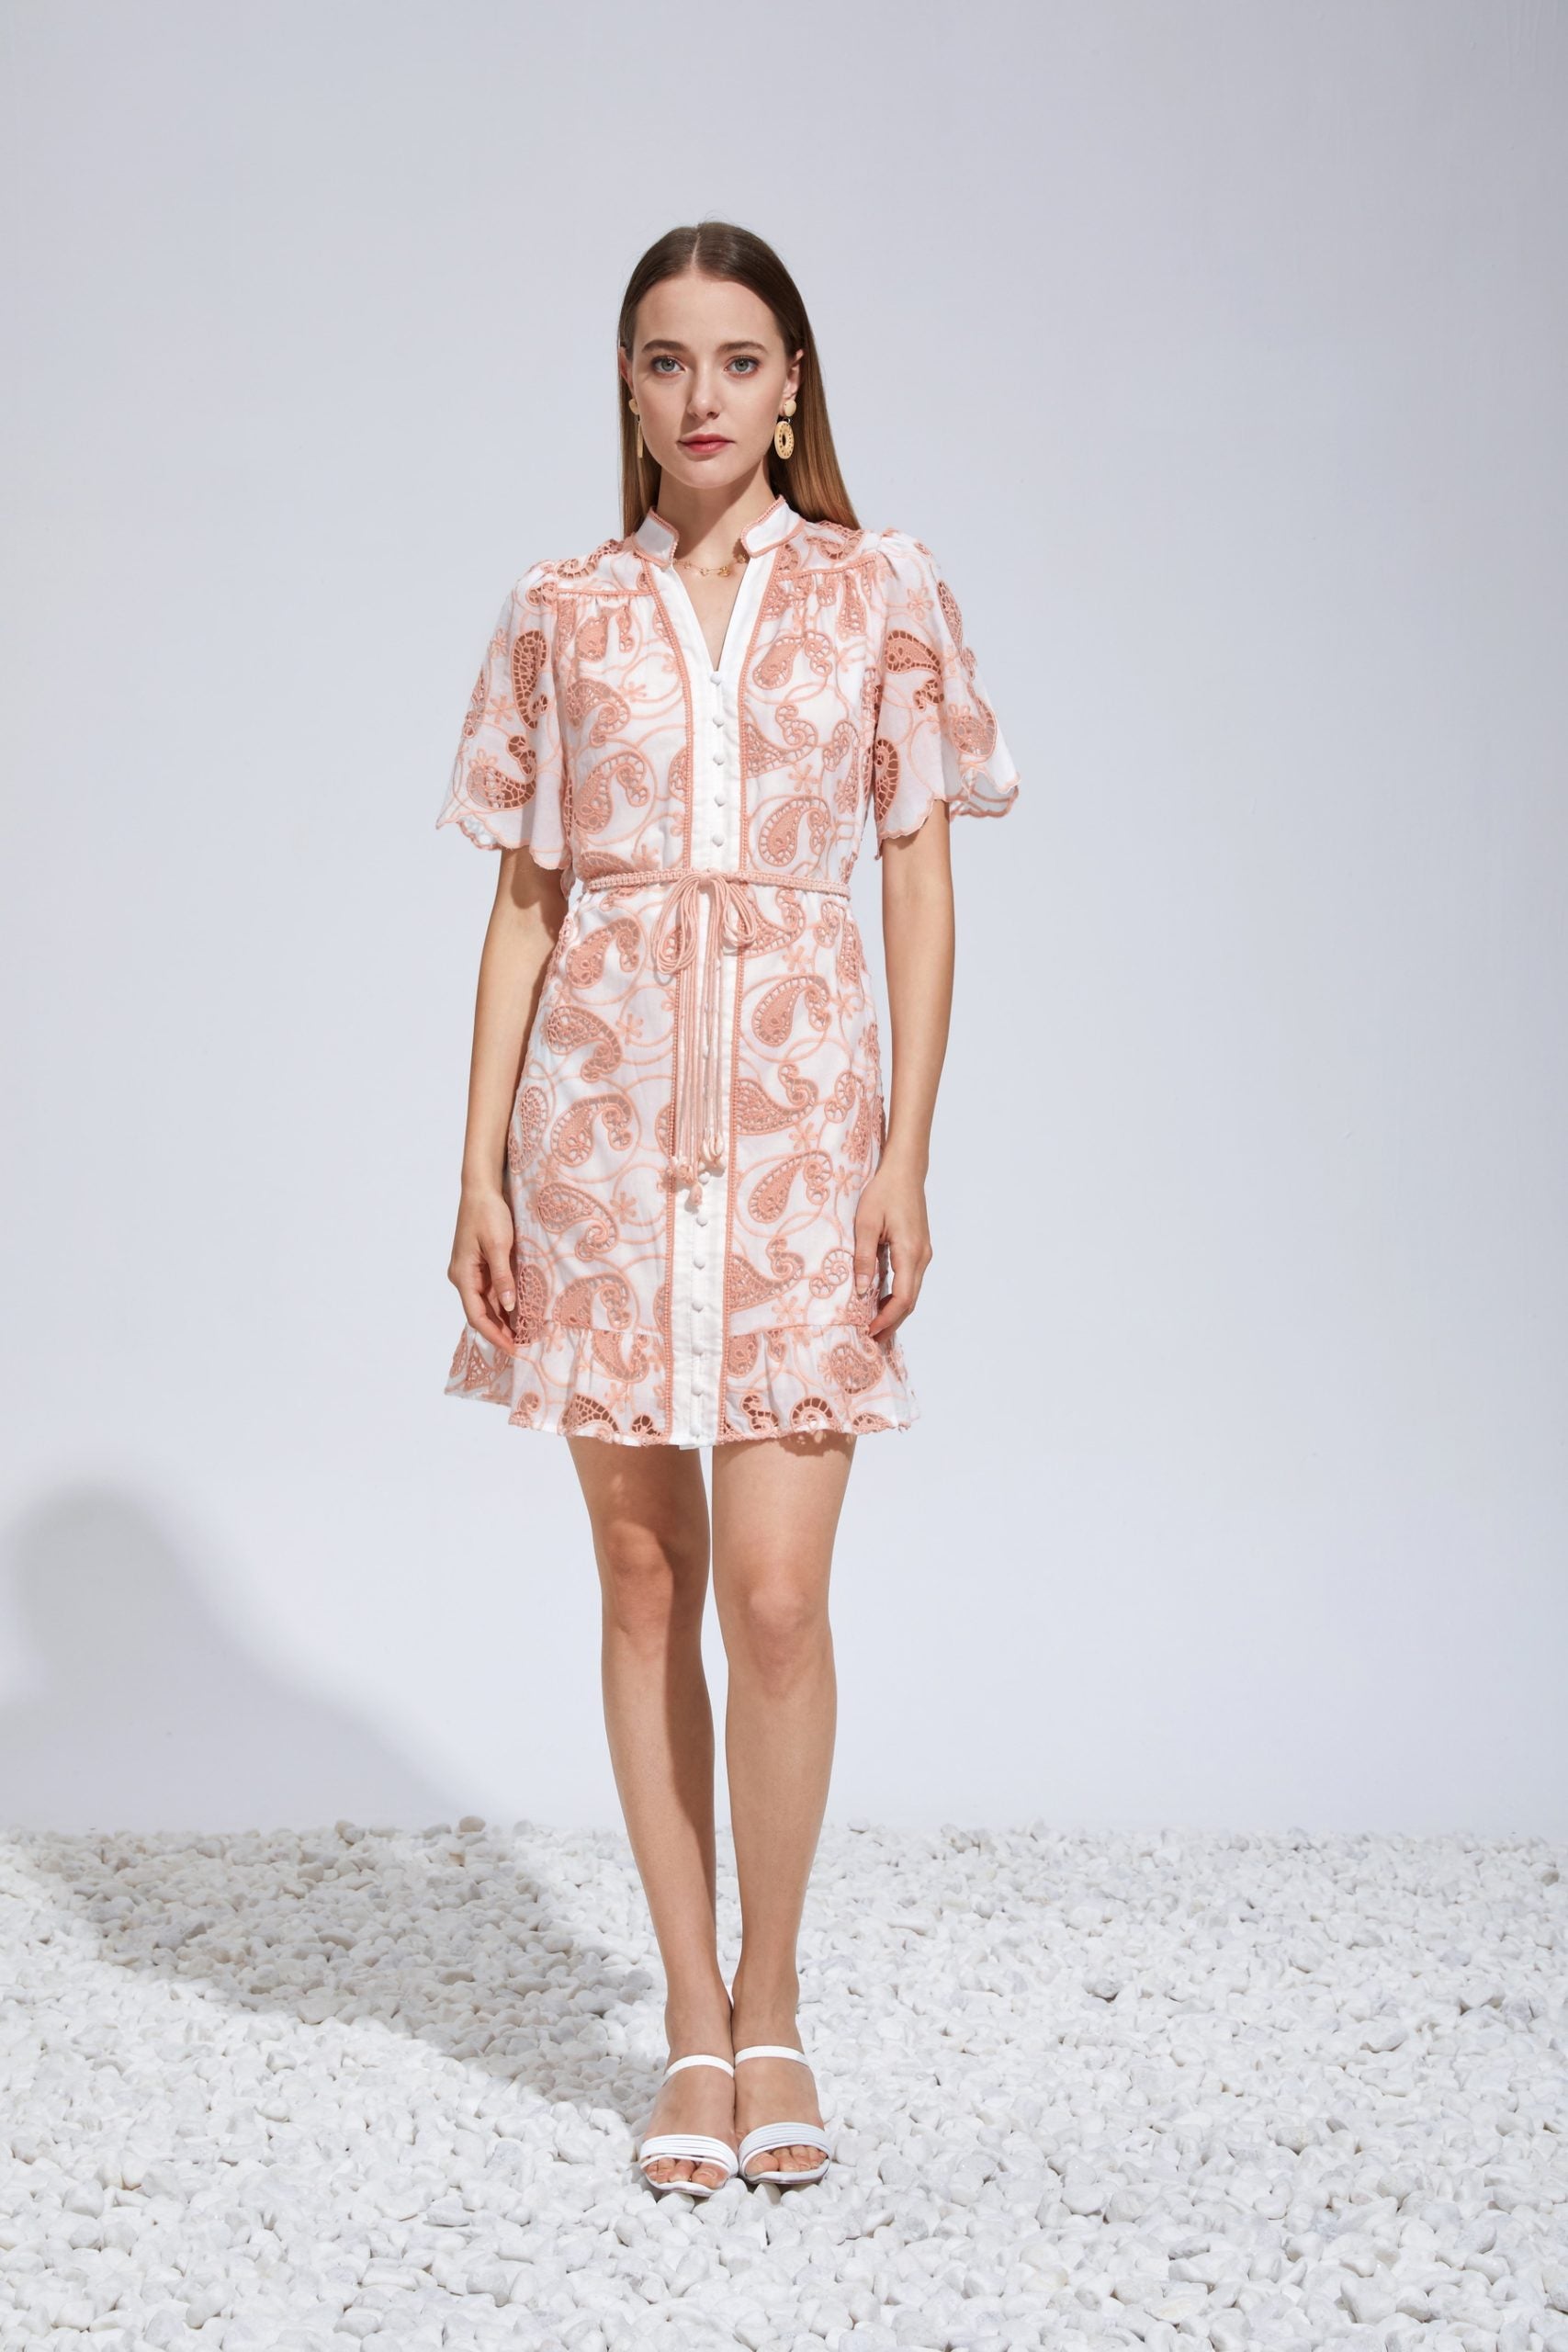 "Turn heads with our floral embroidered short midi dress. Effortless elegance awaits. Buy now!"